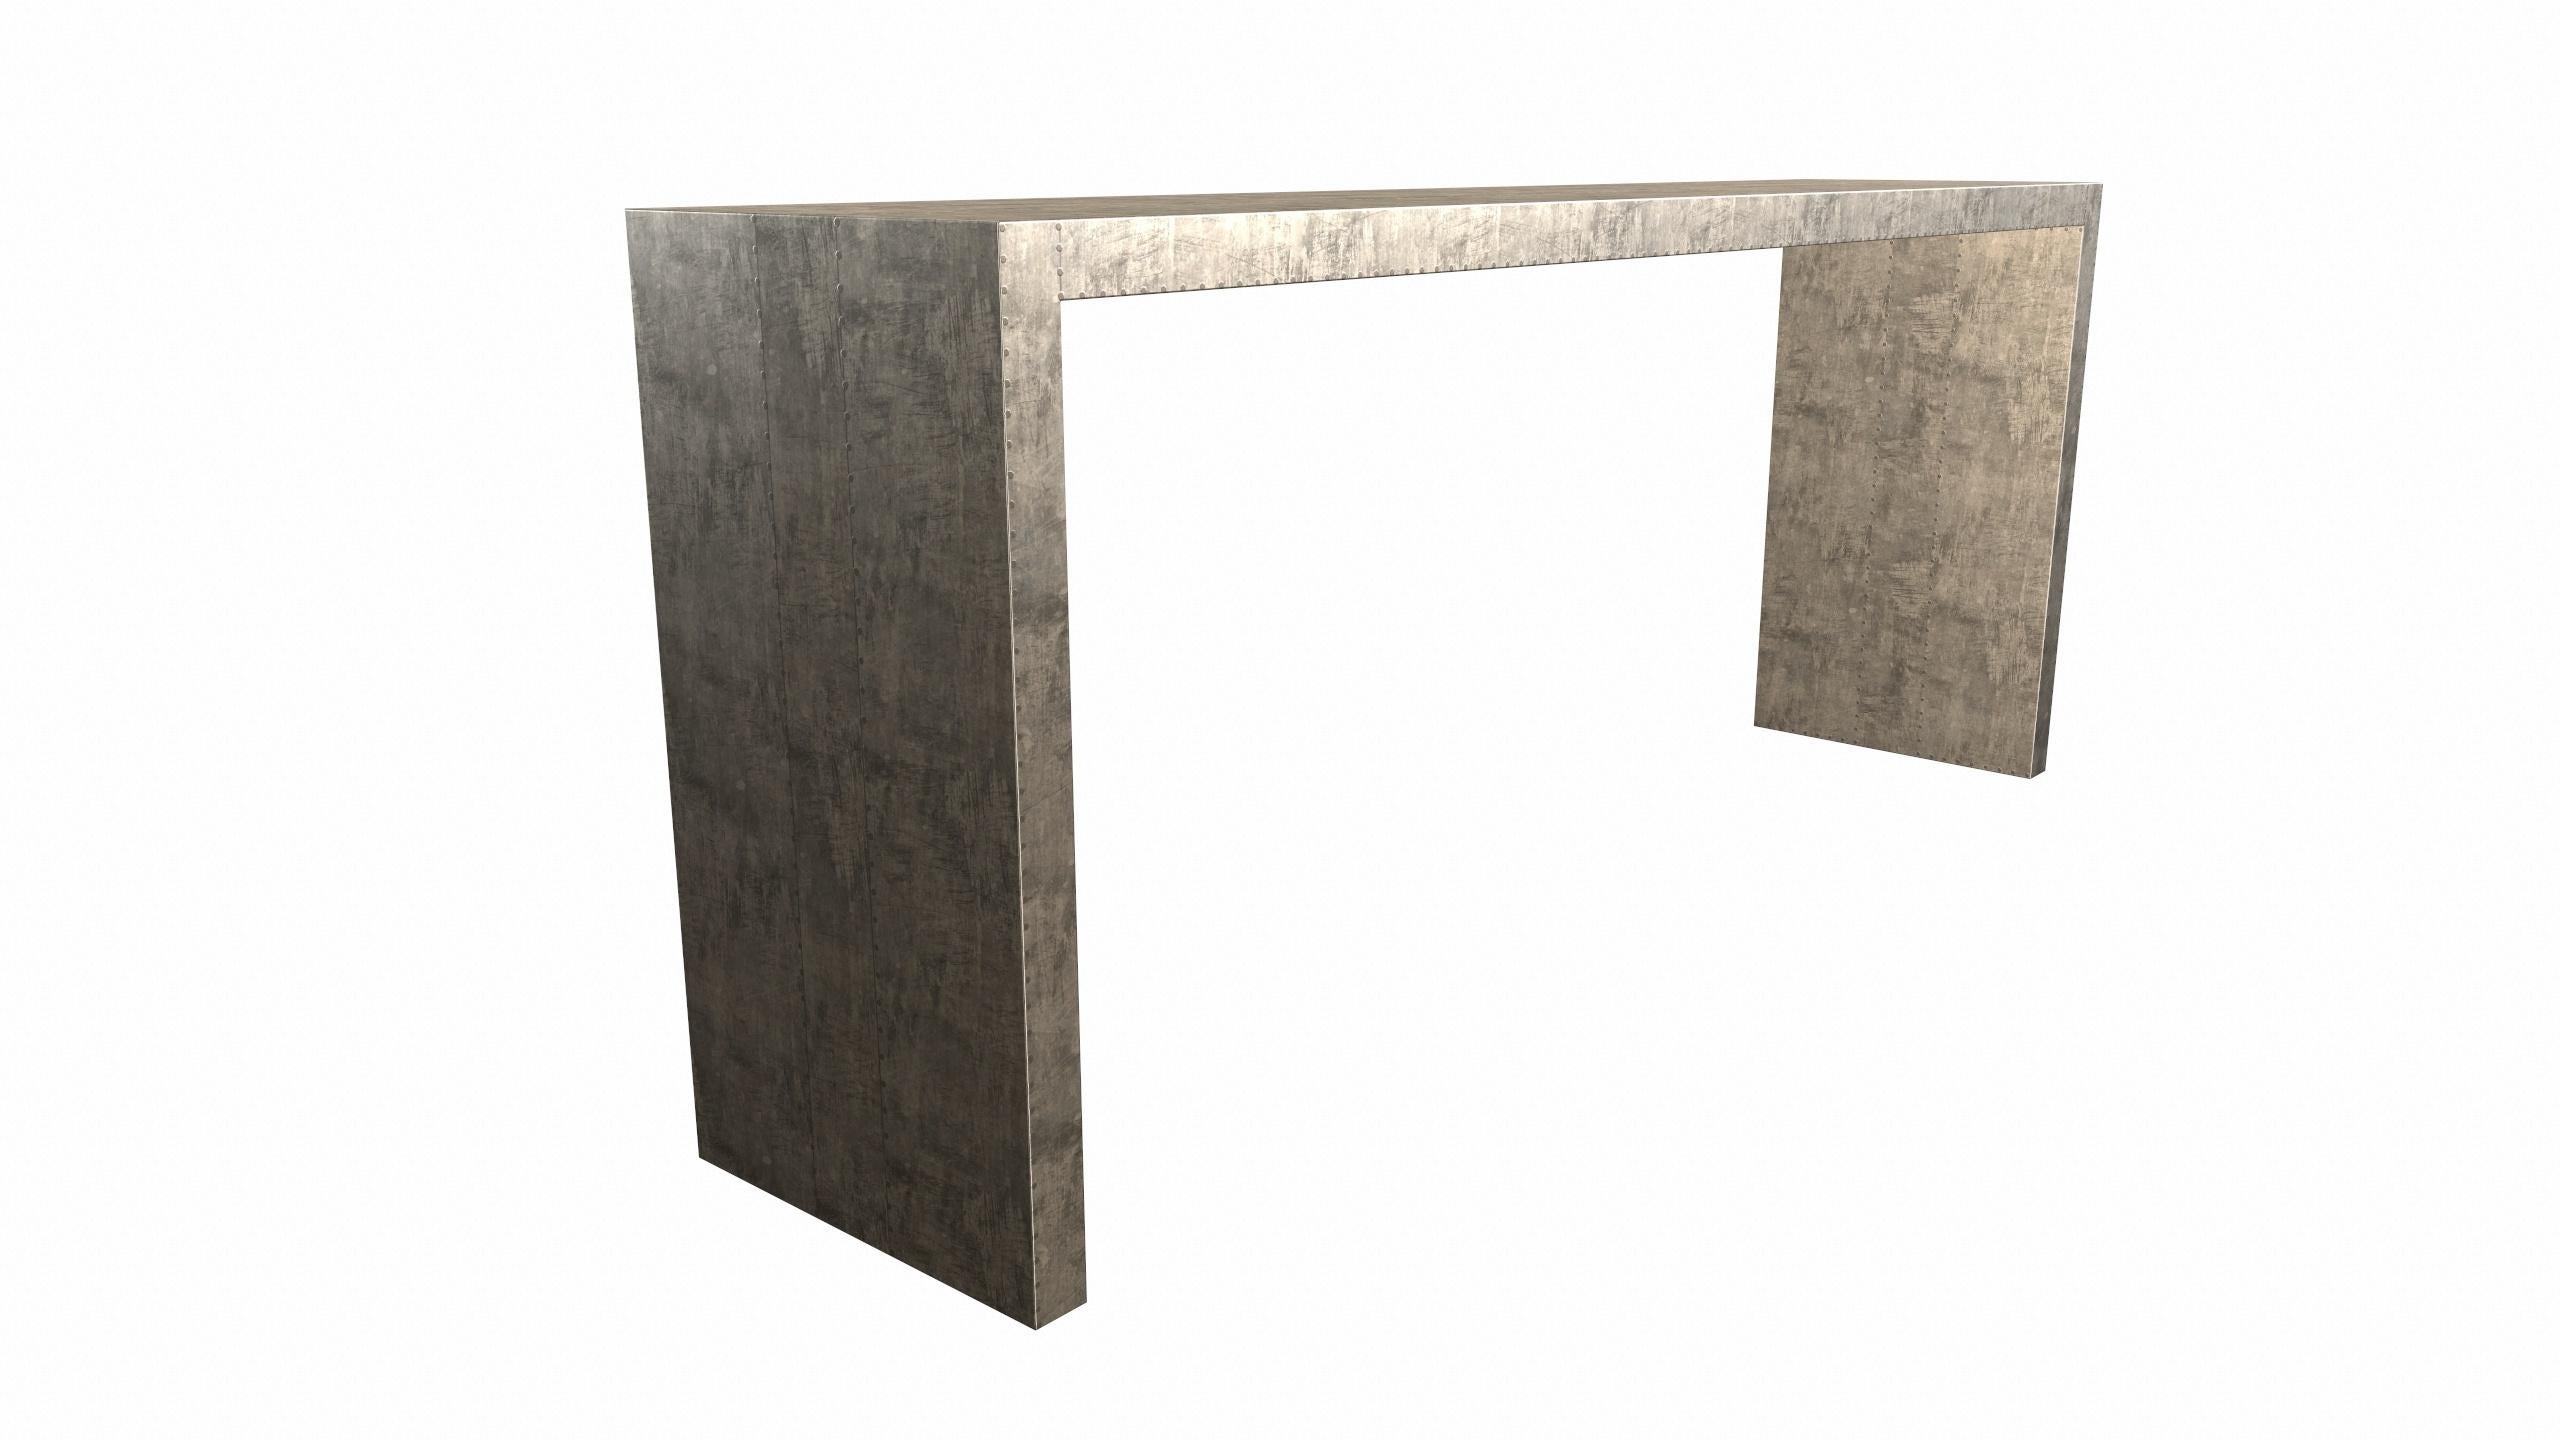 American Art Deco Rectangular Console Tables in Smooth Antique Bronze by Alison Spear For Sale